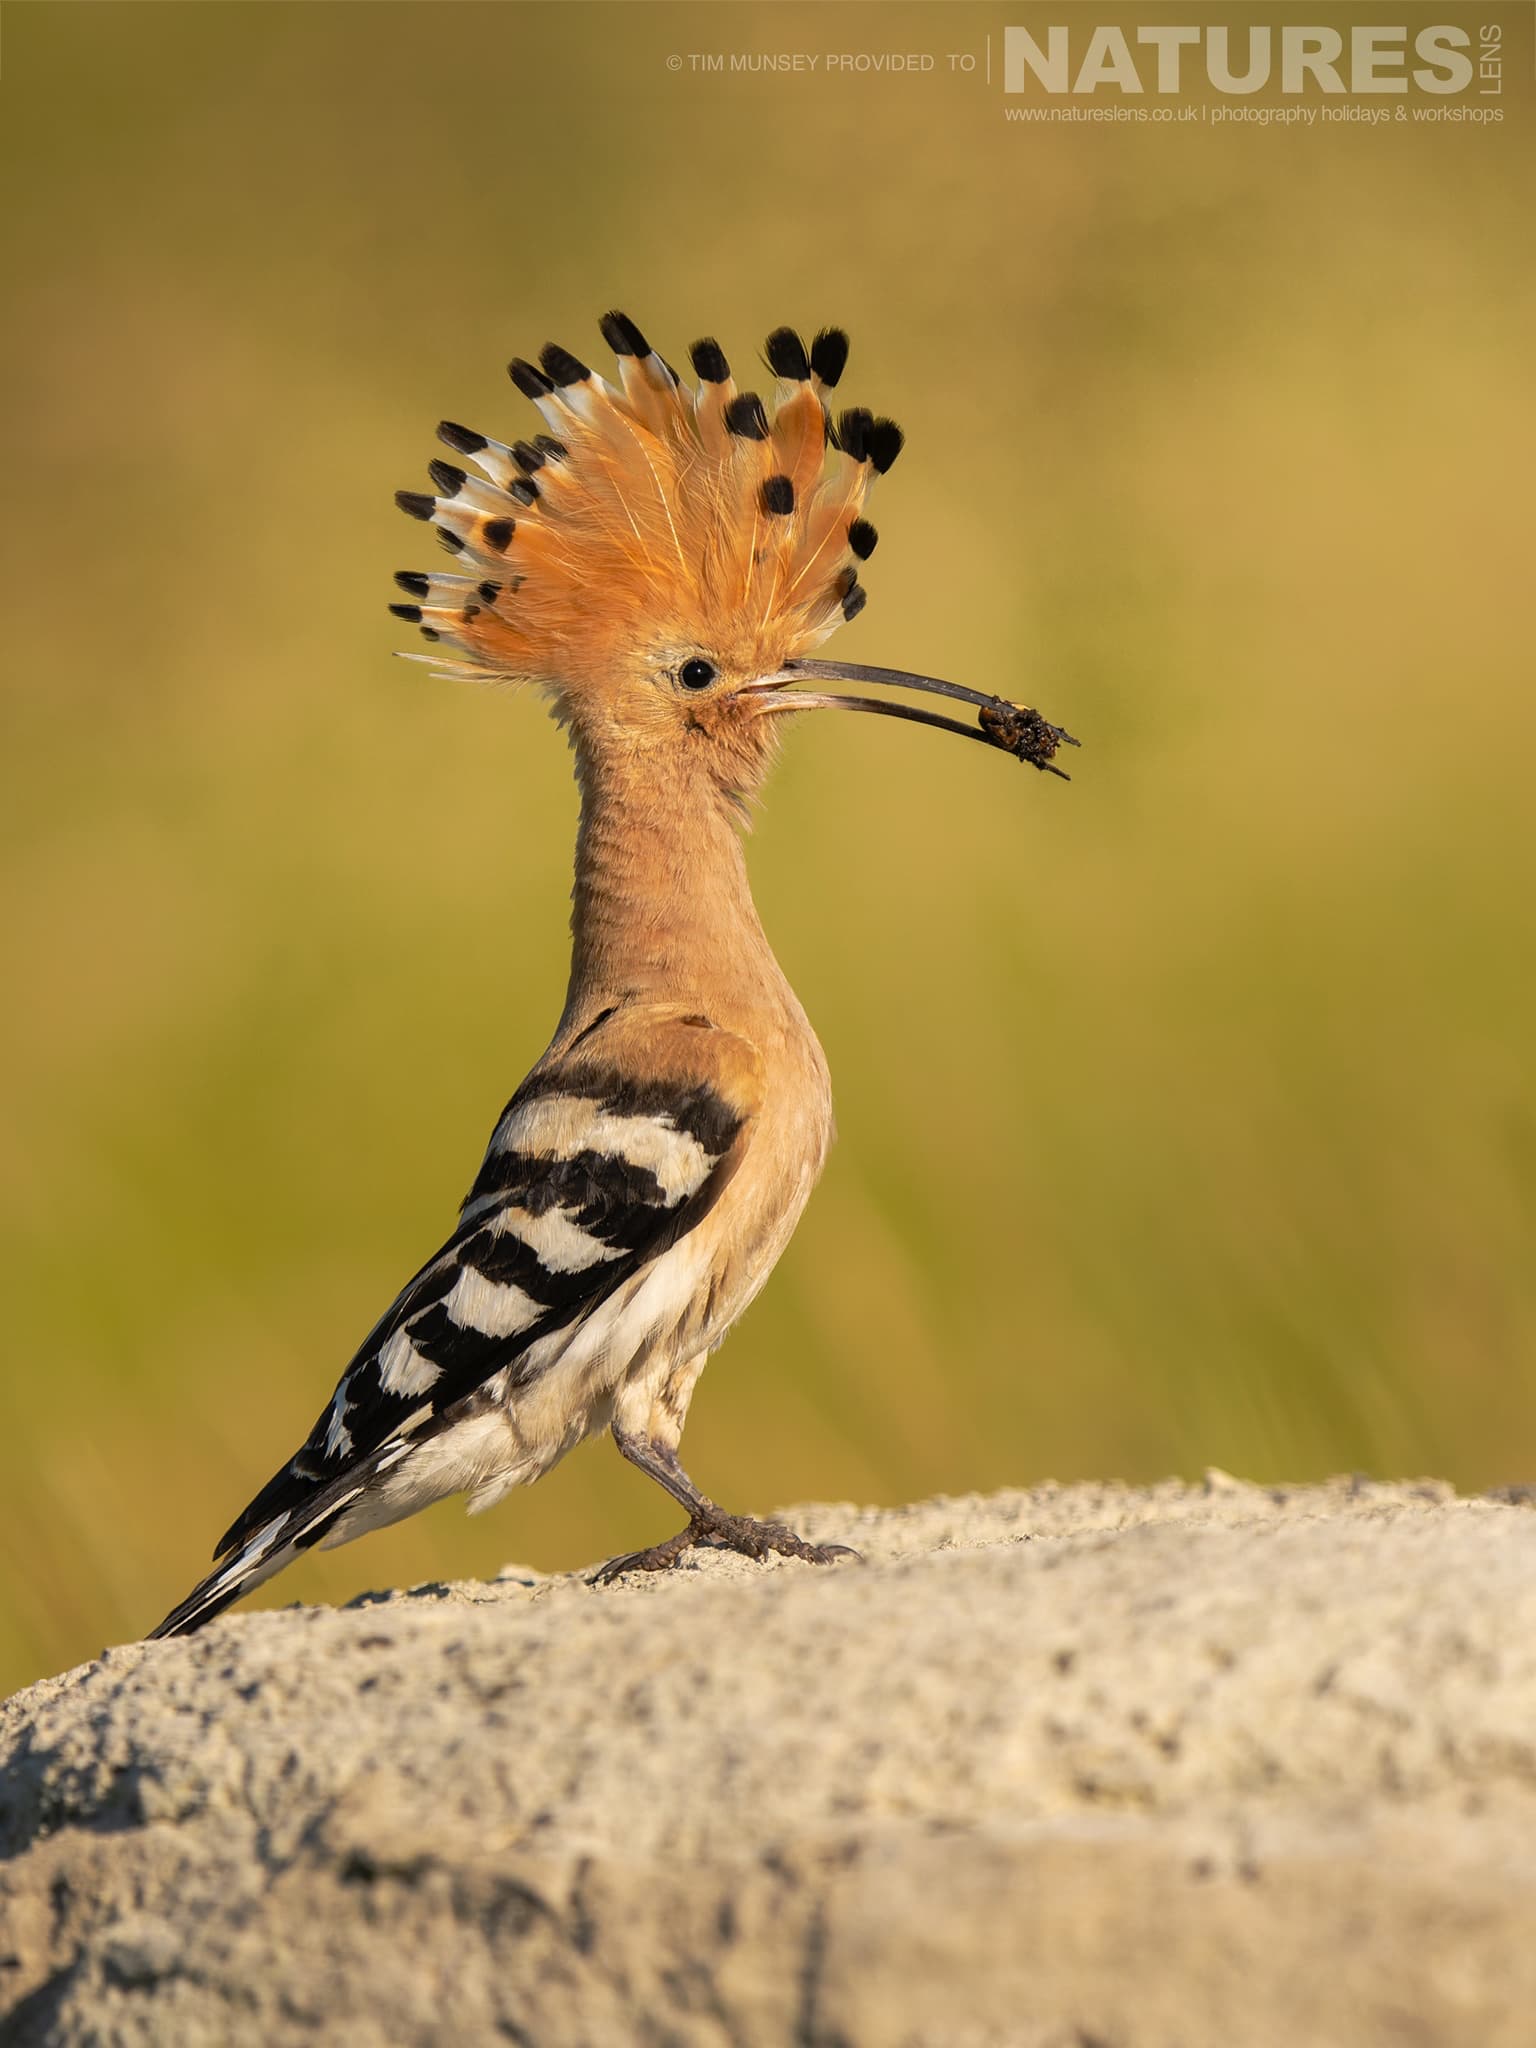 A Hoopoe stood on a rock with its crest raised - photographed at Bence Máté's hides in Hungary during a NaturesLens wildlife photography holiday